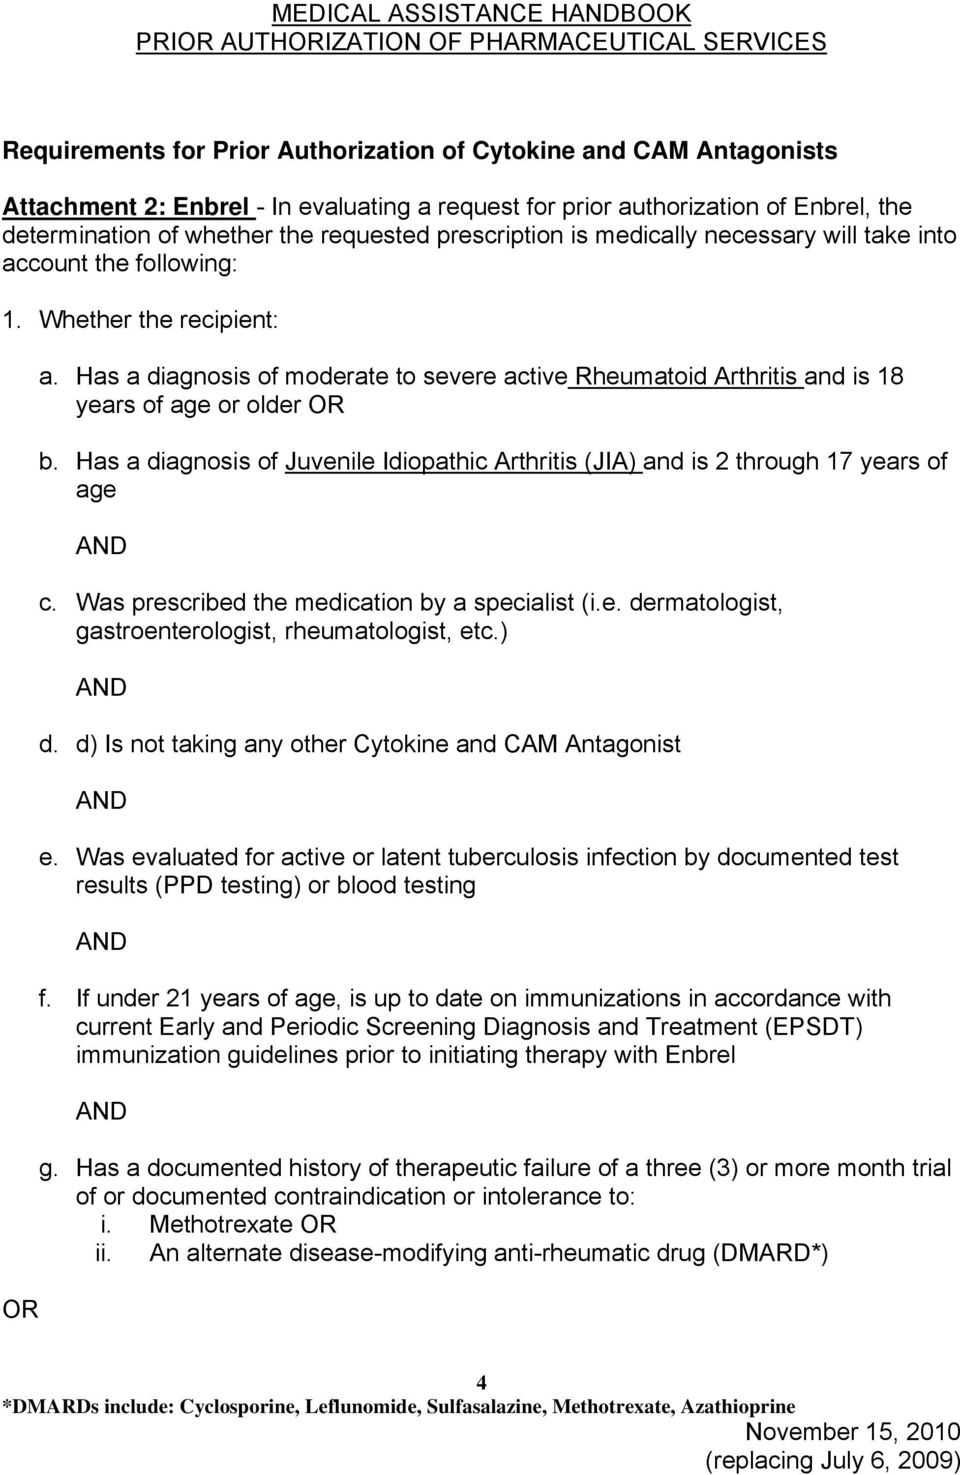 Has a diagnosis of moderate to severe active Rheumatoid Arthritis and is 18 years of age or older b. Has a diagnosis of Juvenile Idiopathic Arthritis (JIA) and is 2 through 17 years of age c.